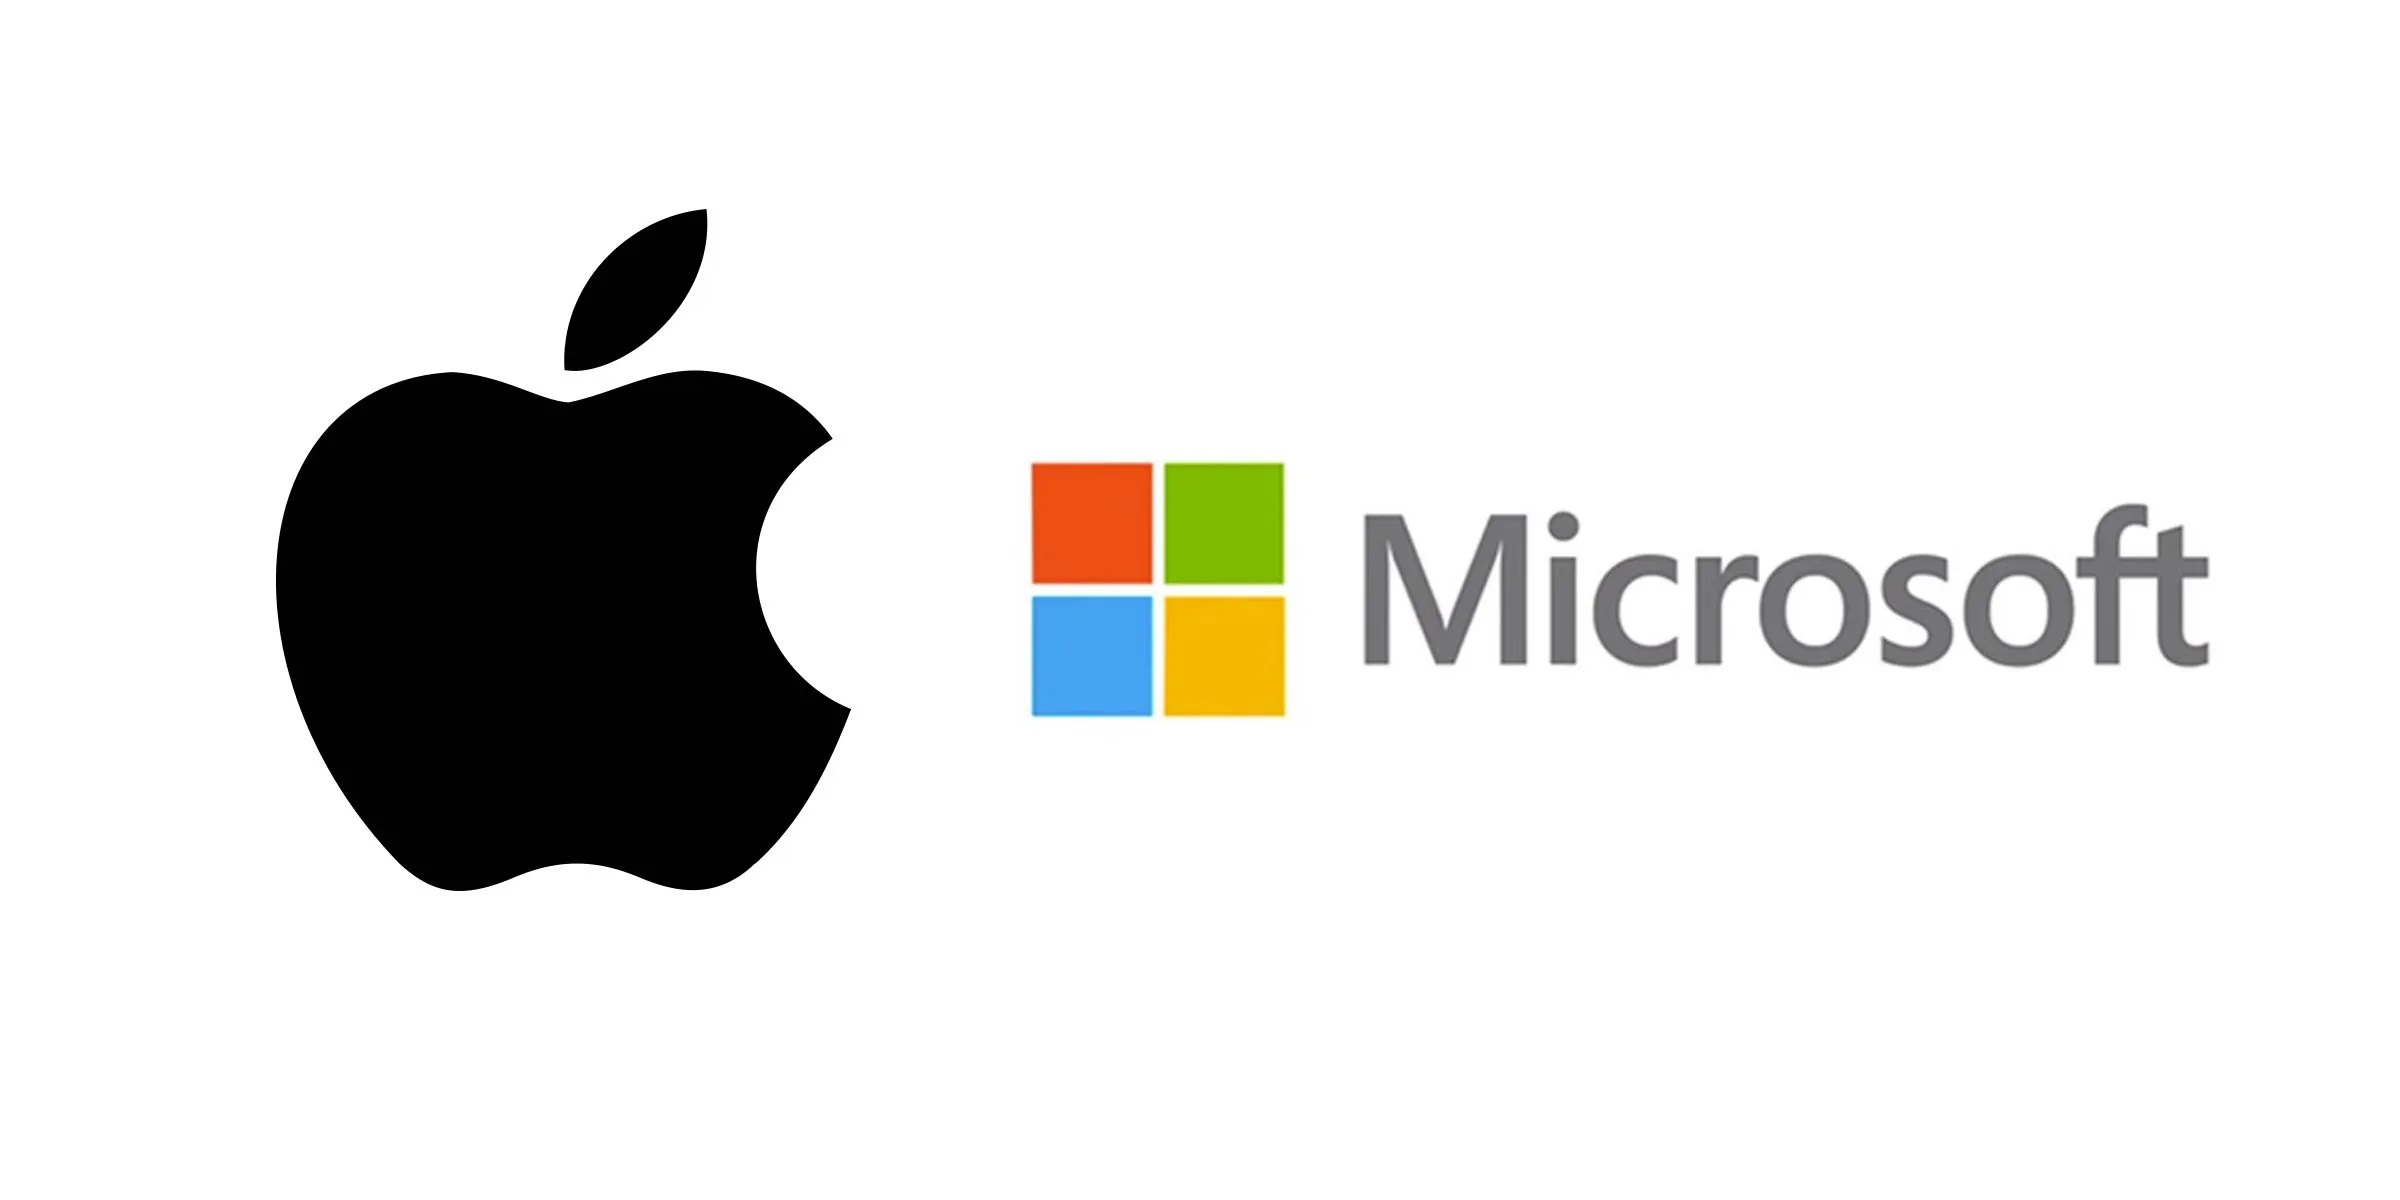 Microsoft has overtaken Apple to become the world's most valuable company (but not for long)